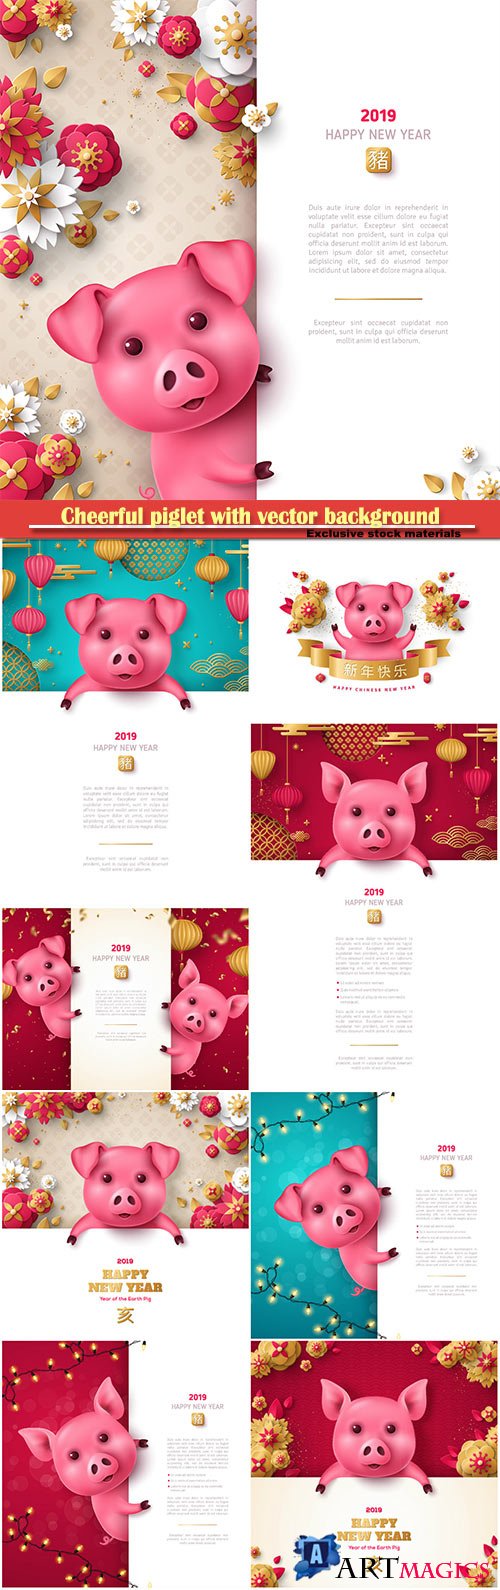 Cheerful piglet with vector background for 2019 Happy Chinese New Year